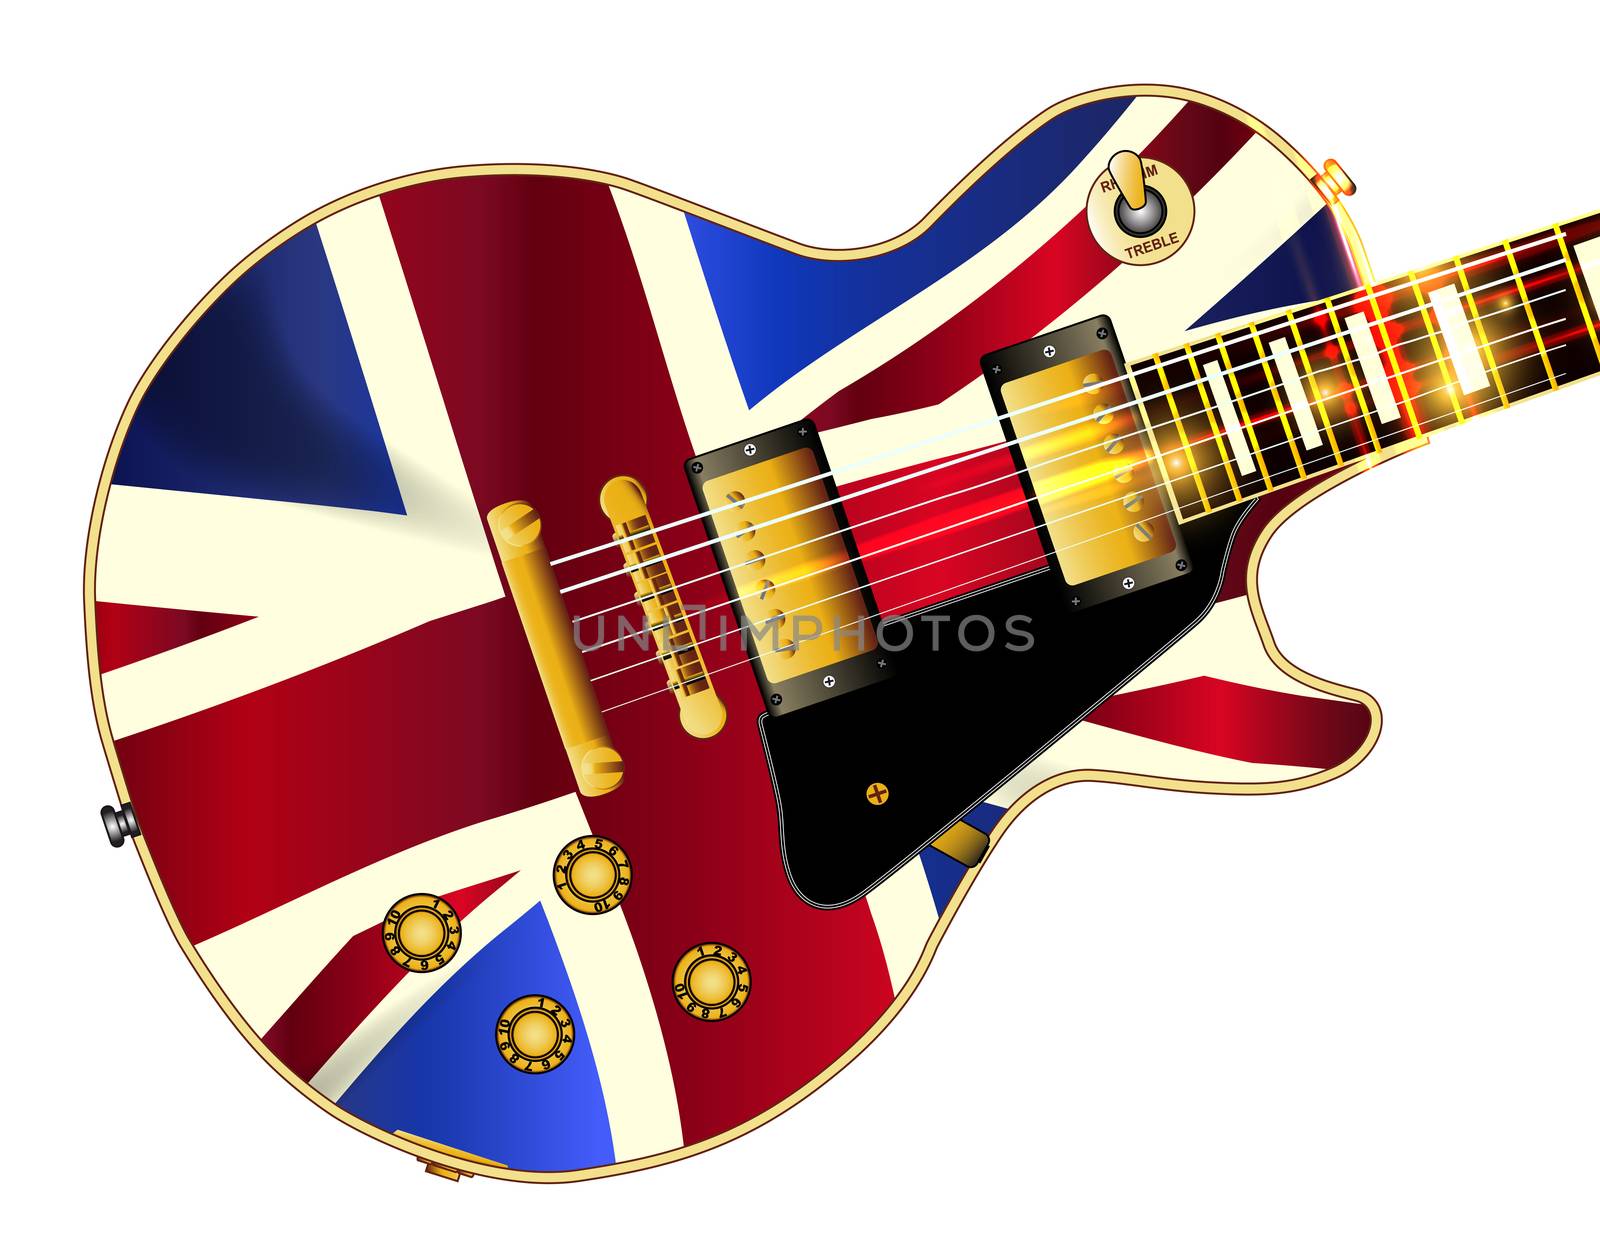 The definitive rock and roll guitar with the Union Jack Flag flag isolated over a white background.